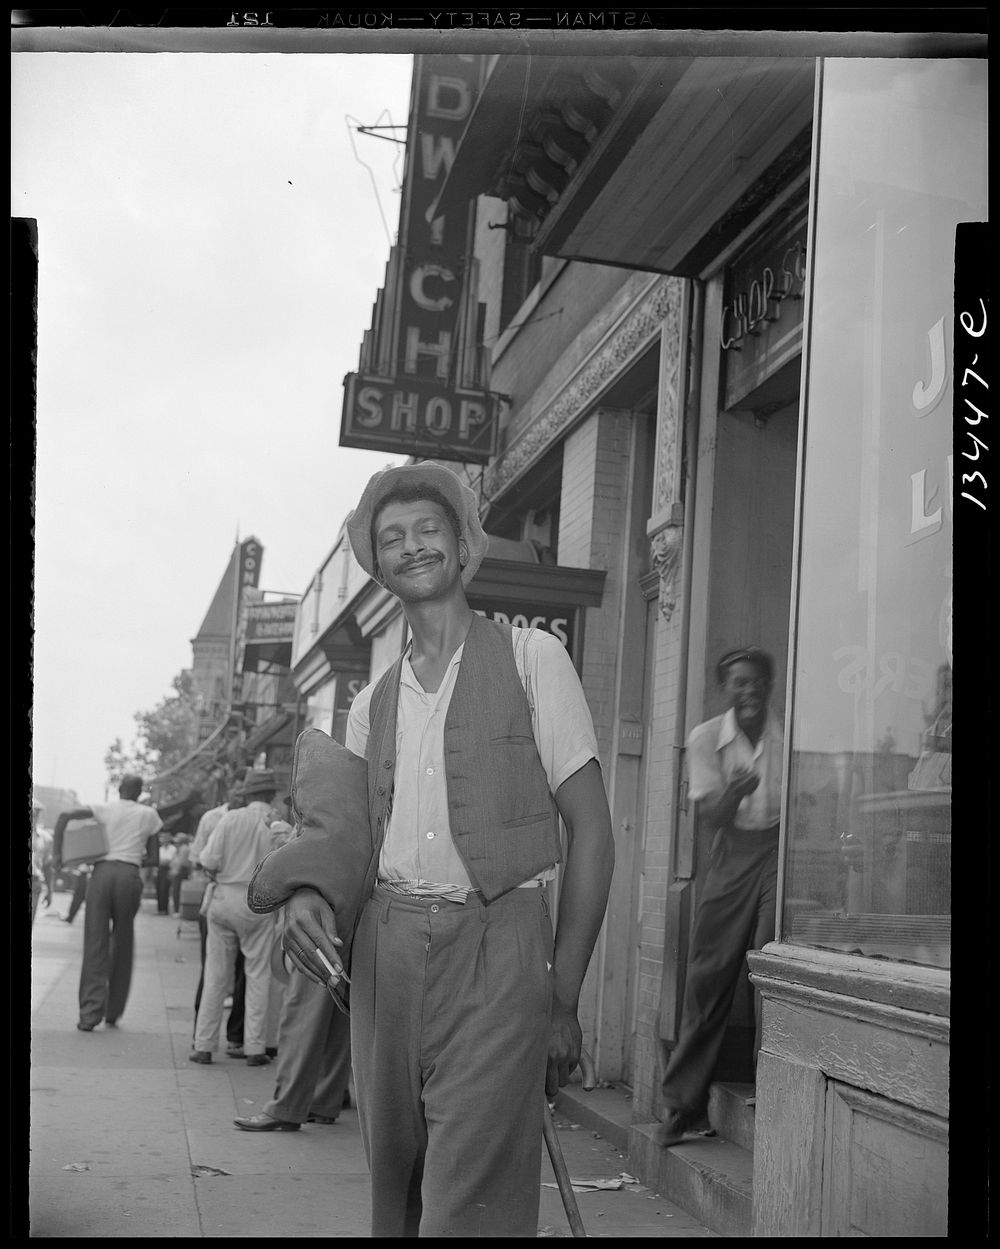 Washington, D.C. Panhandler on 7th Street, N.W.. Sourced from the Library of Congress.